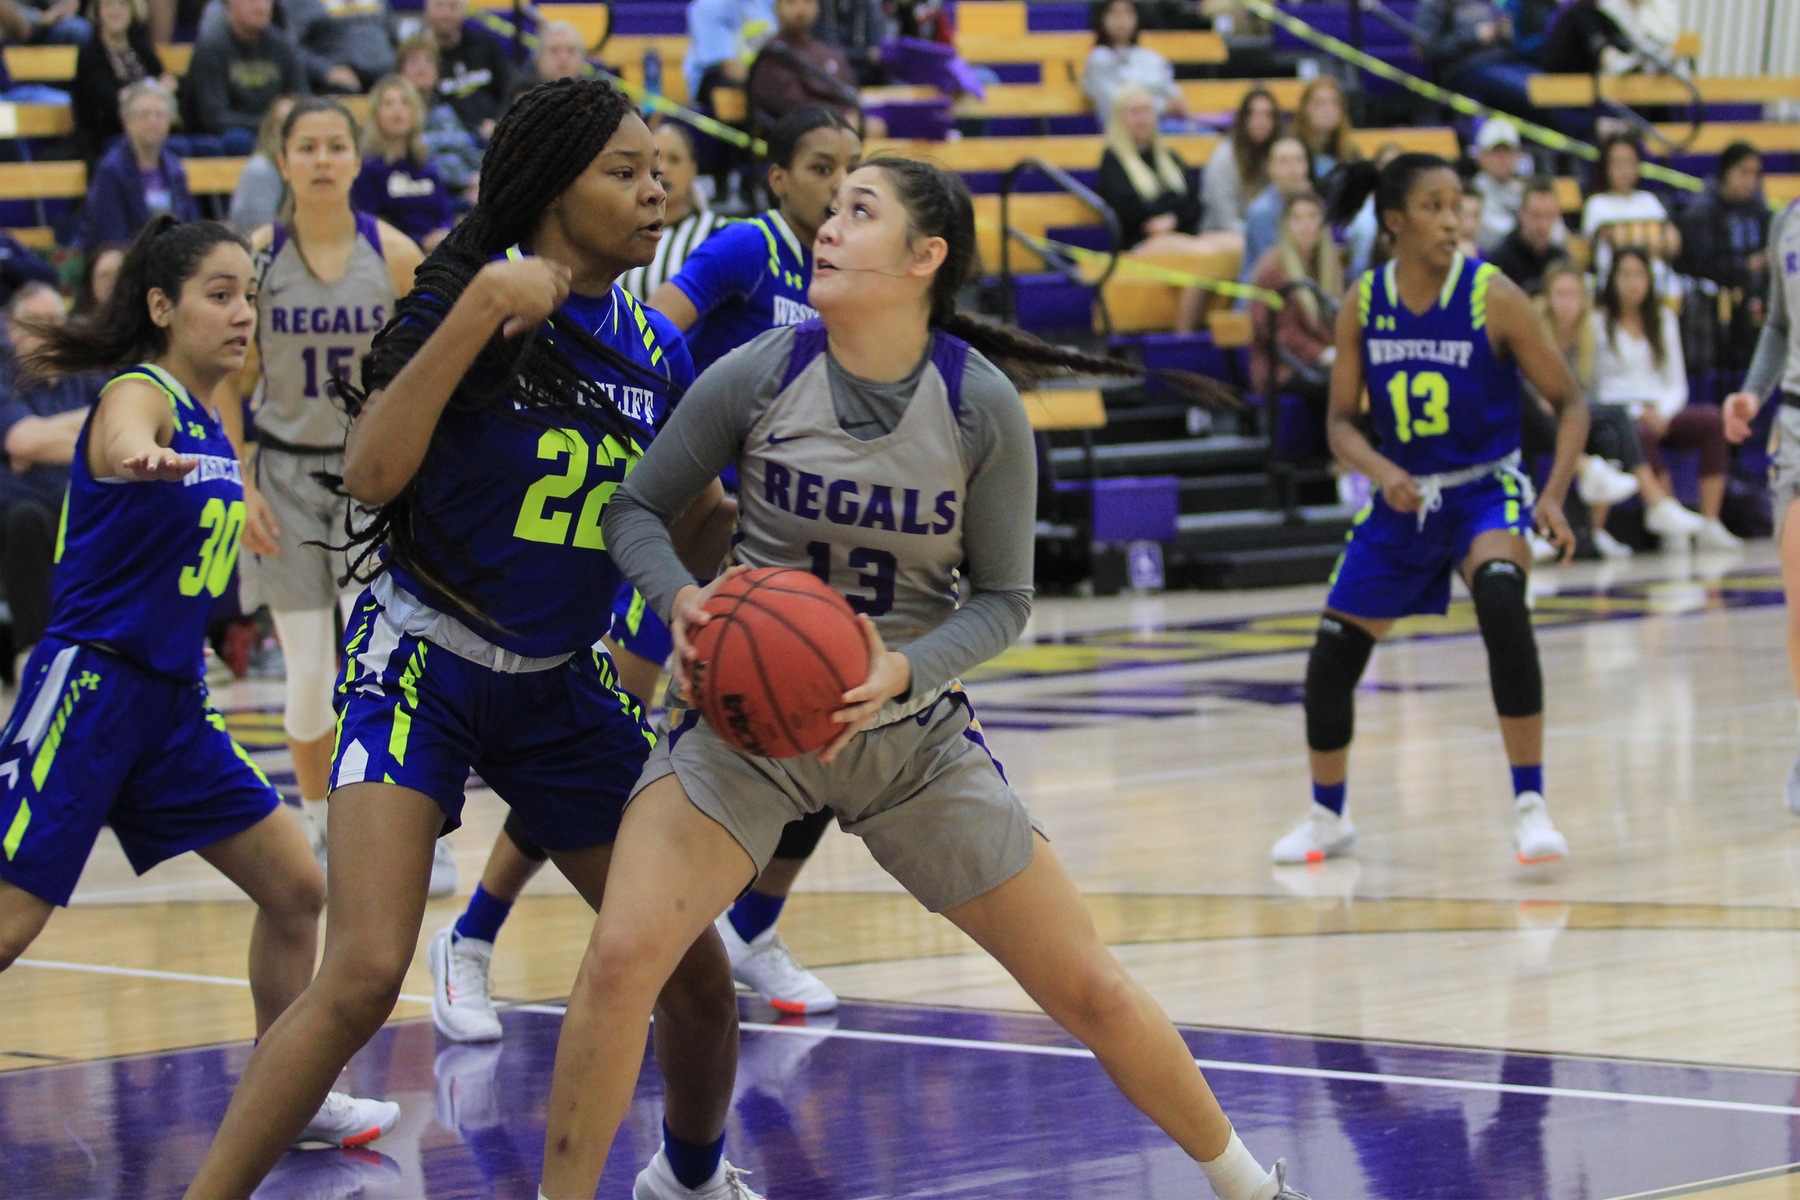 Haley Tyrell picked up her second double-double of the season Wednesday night against La Verne. (Photo Credit: Gabby Flores)